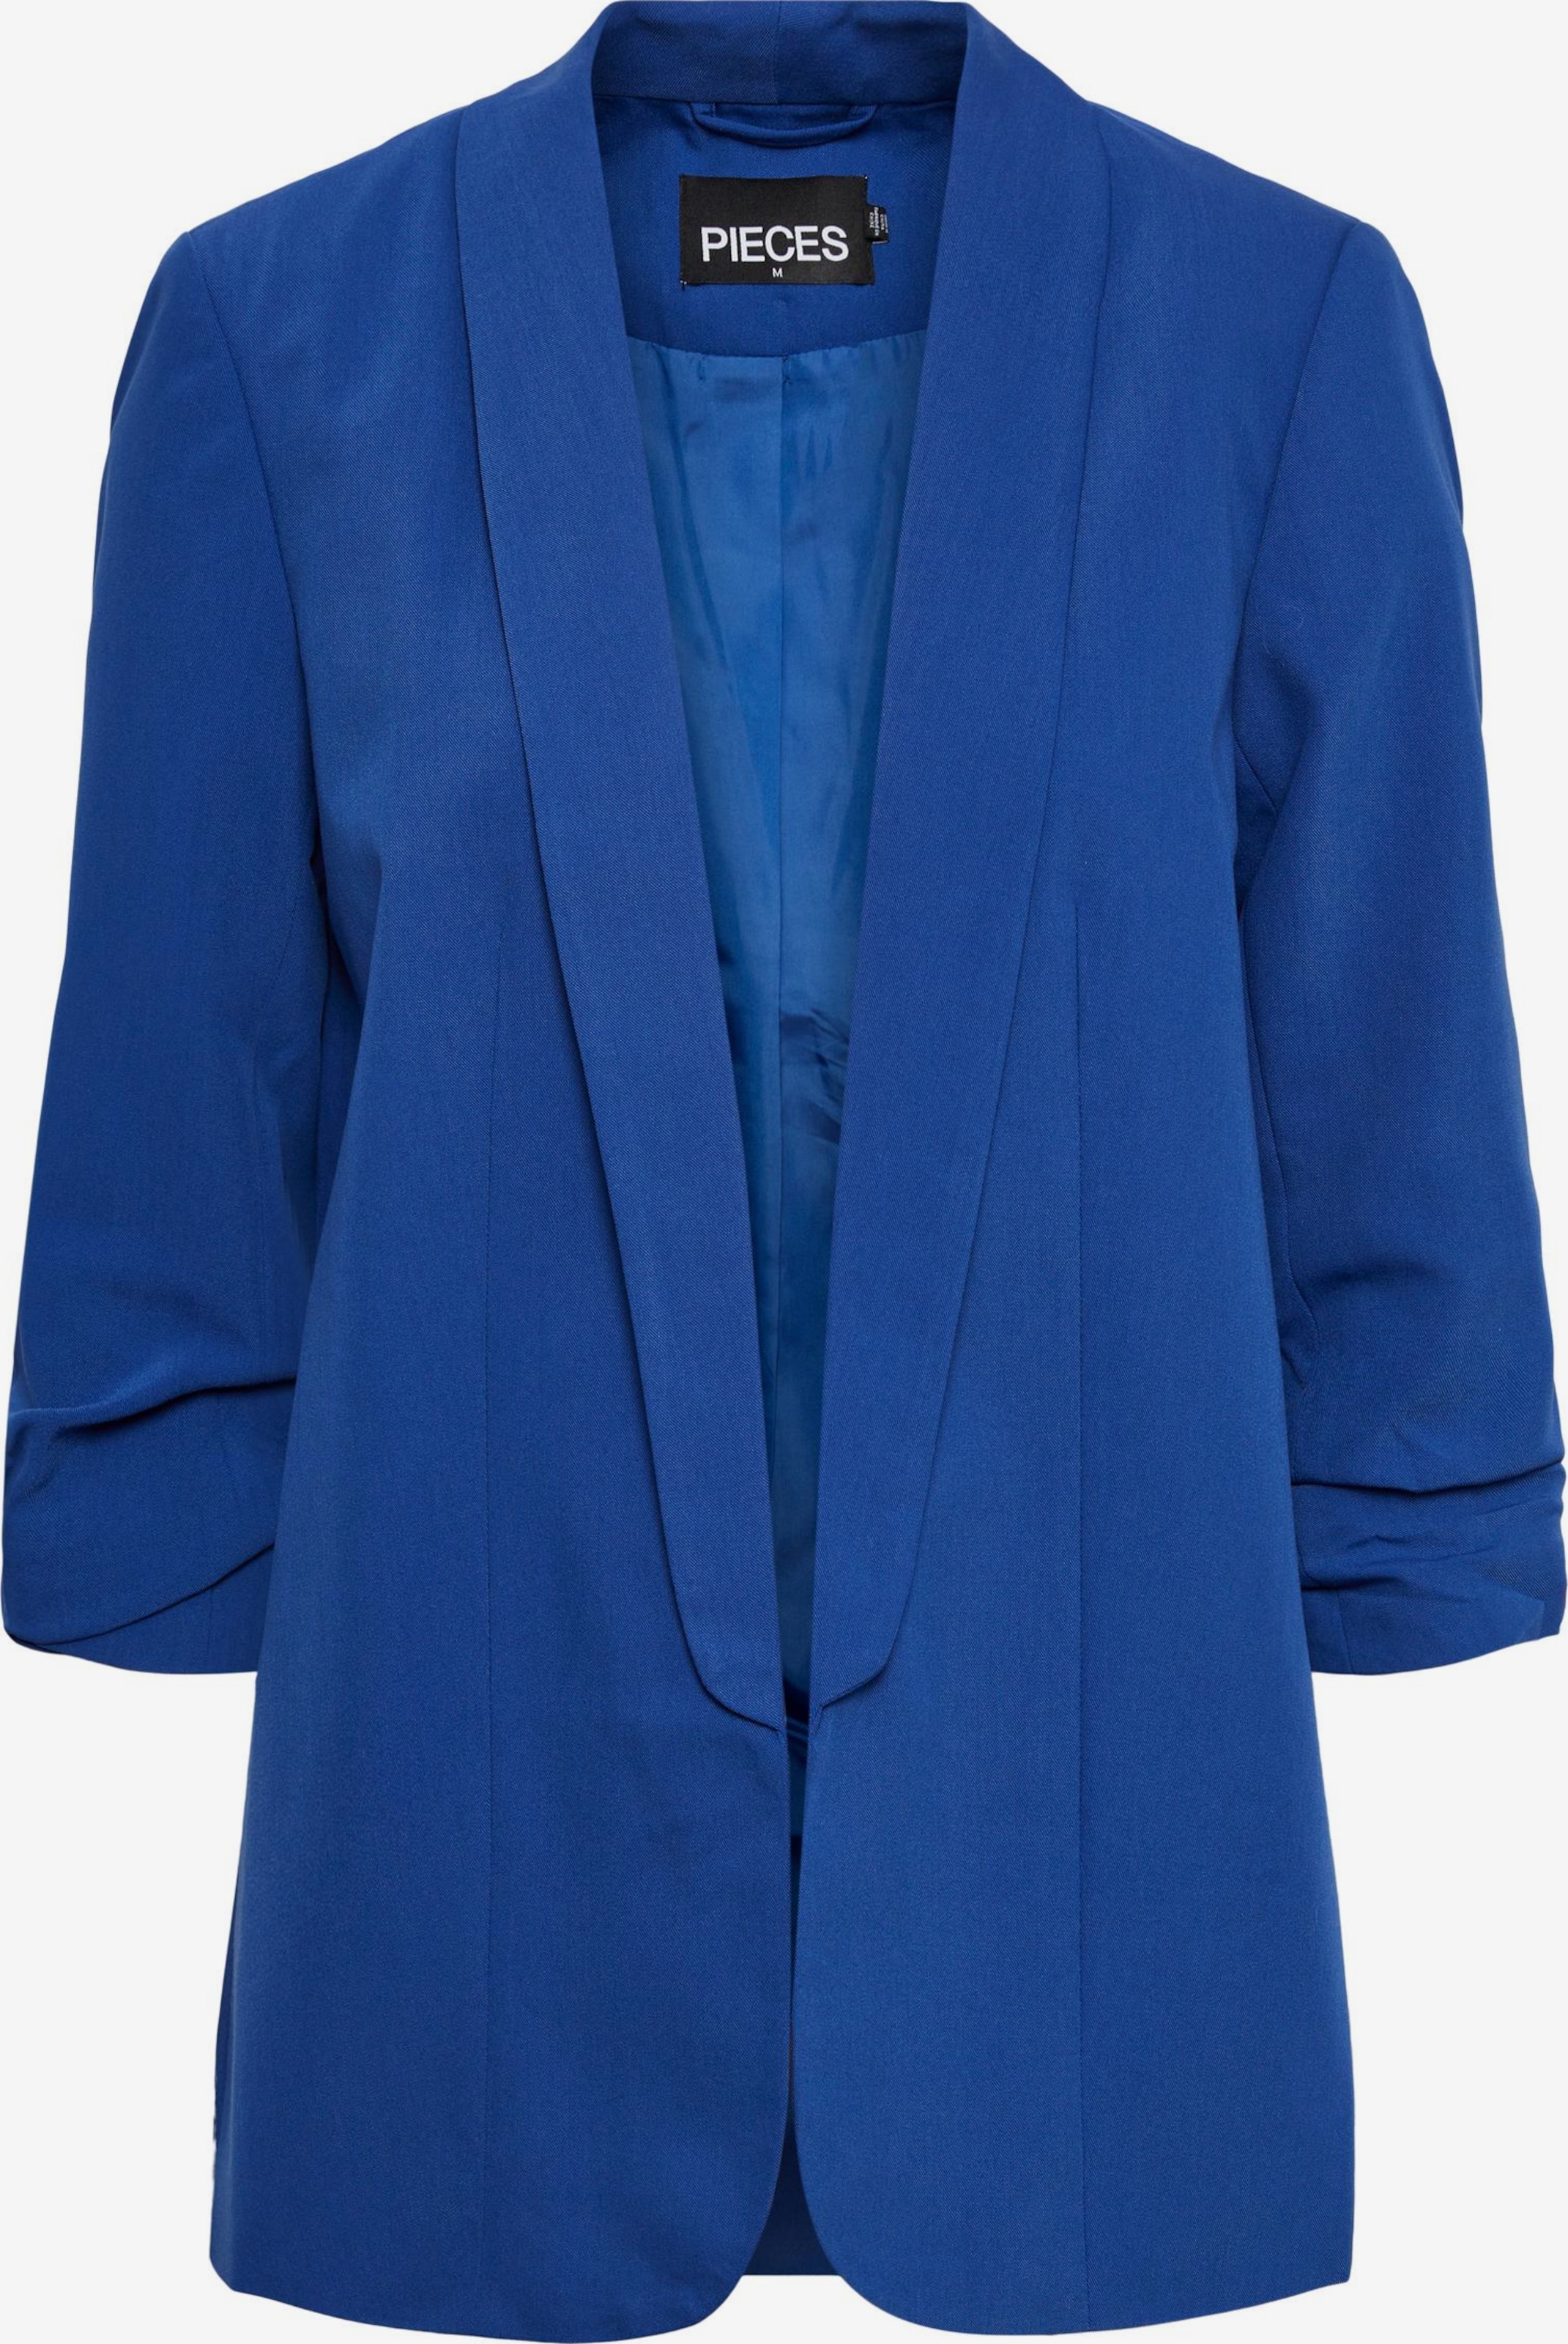 opslaan gerucht Primitief PIECES Blazers in Royal Blue/Koningsblauw | ABOUT YOU